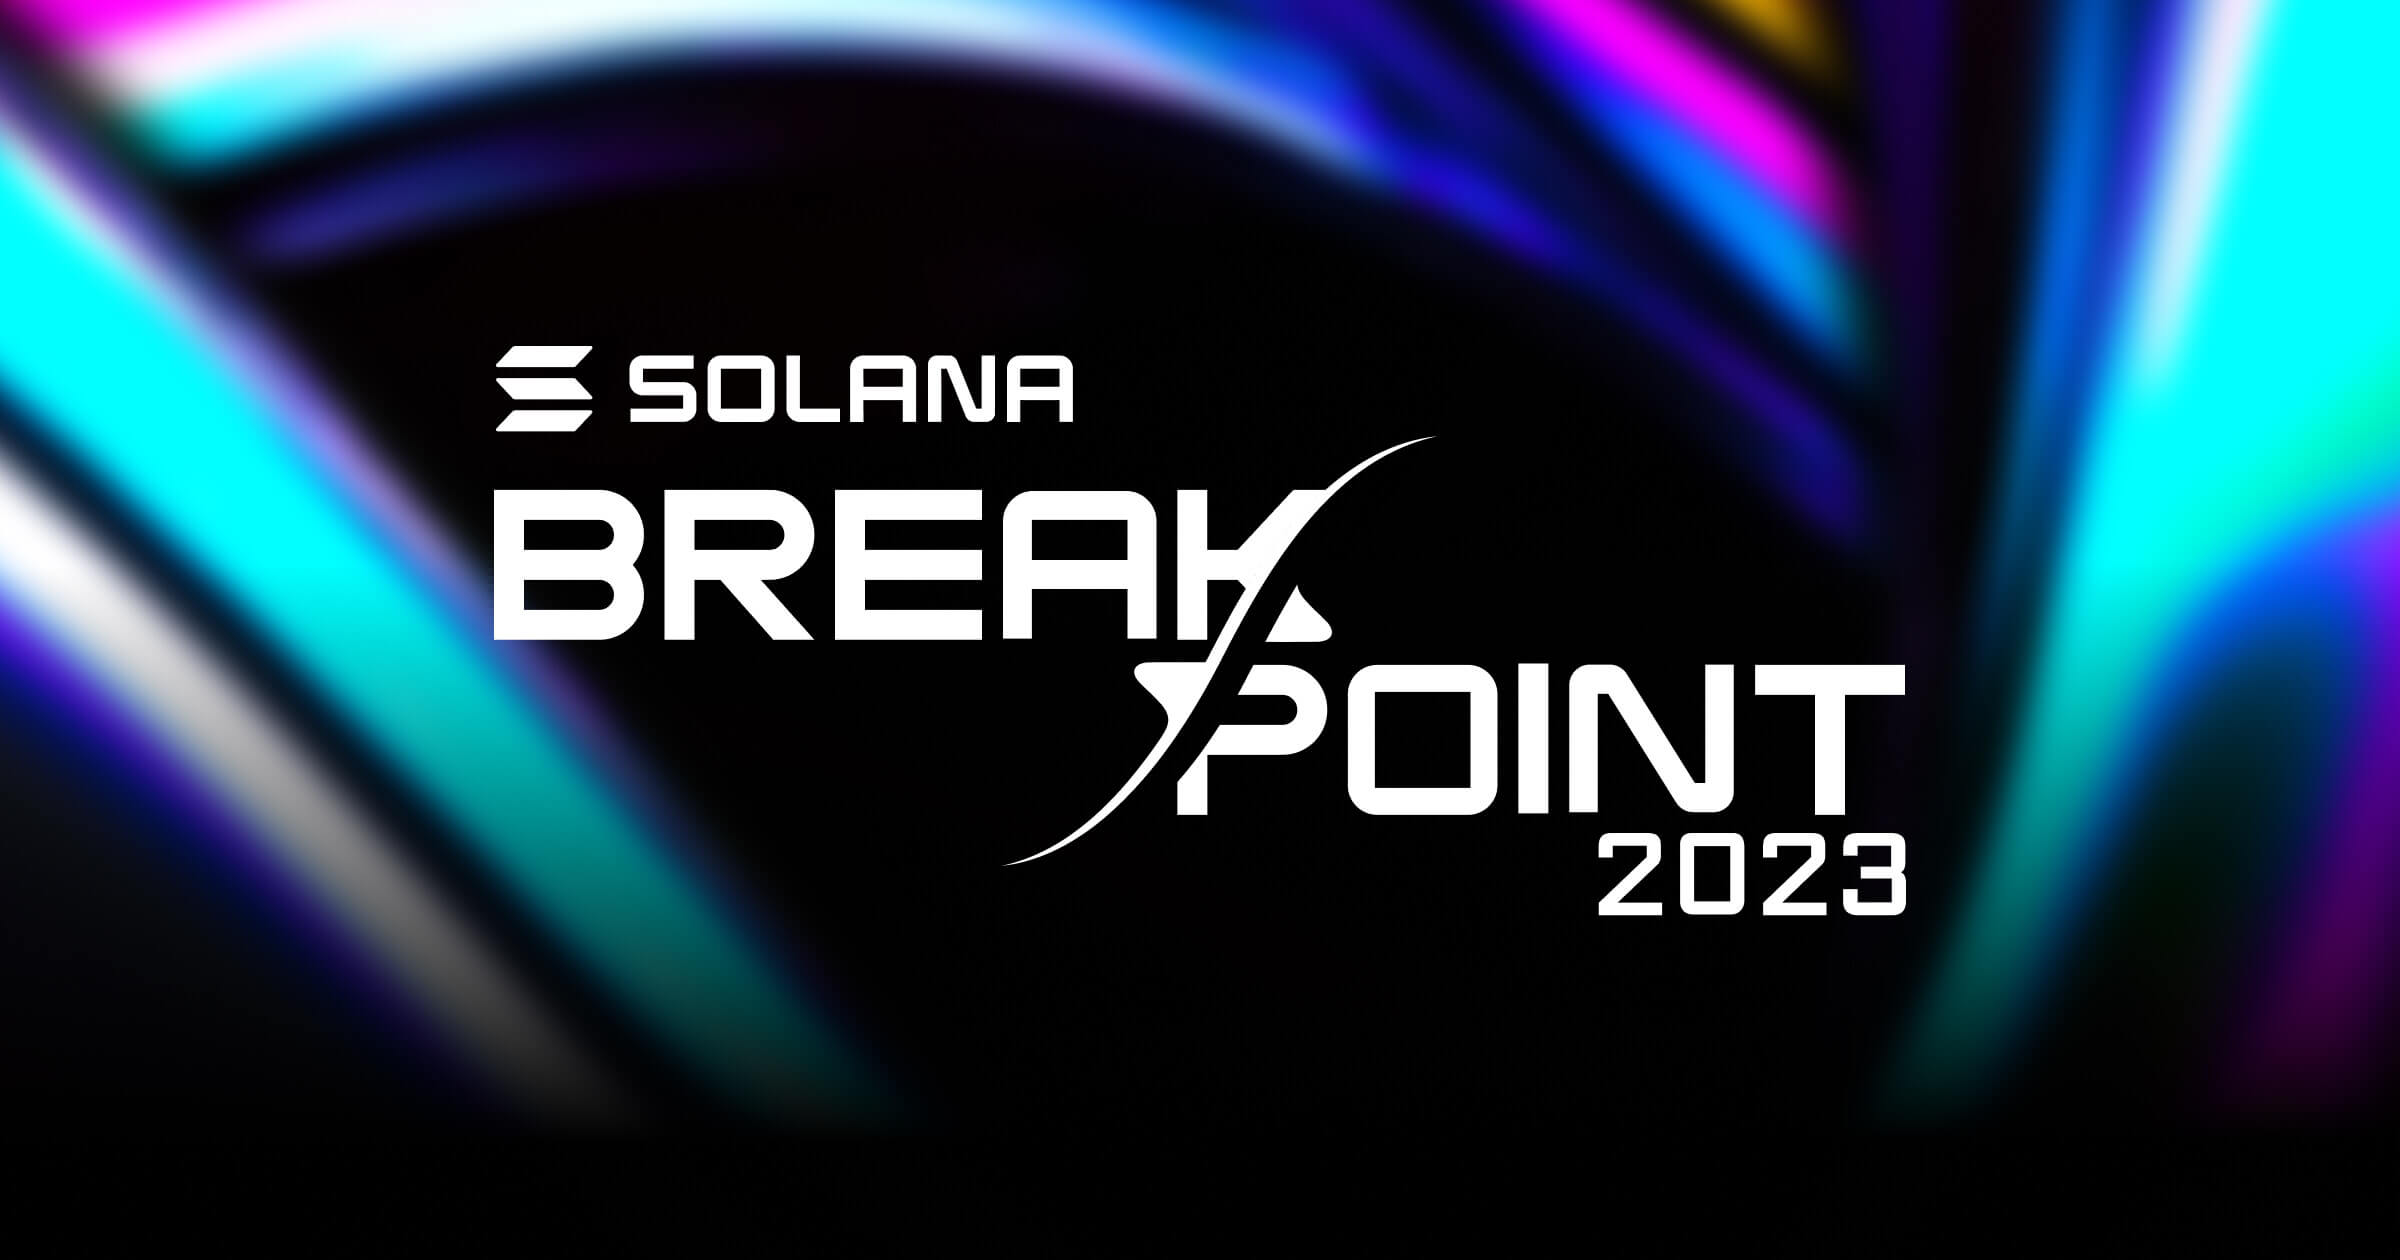 Solana Breakpoint Event